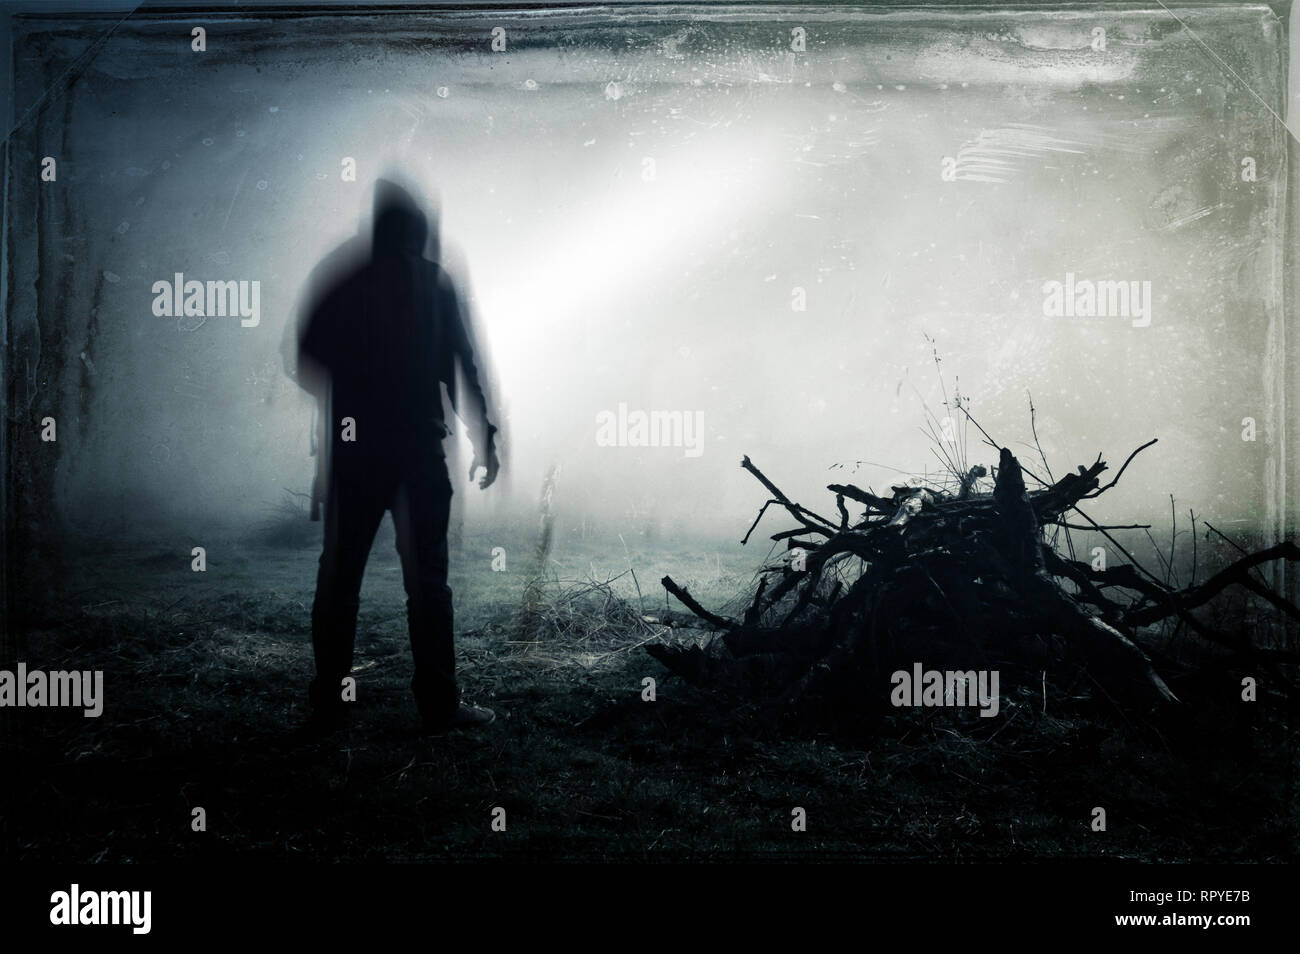 An eerie silhouette of a lone hooded figure in a field With a dark, spooky blurred abstract, grunge effect edit. Stock Photo